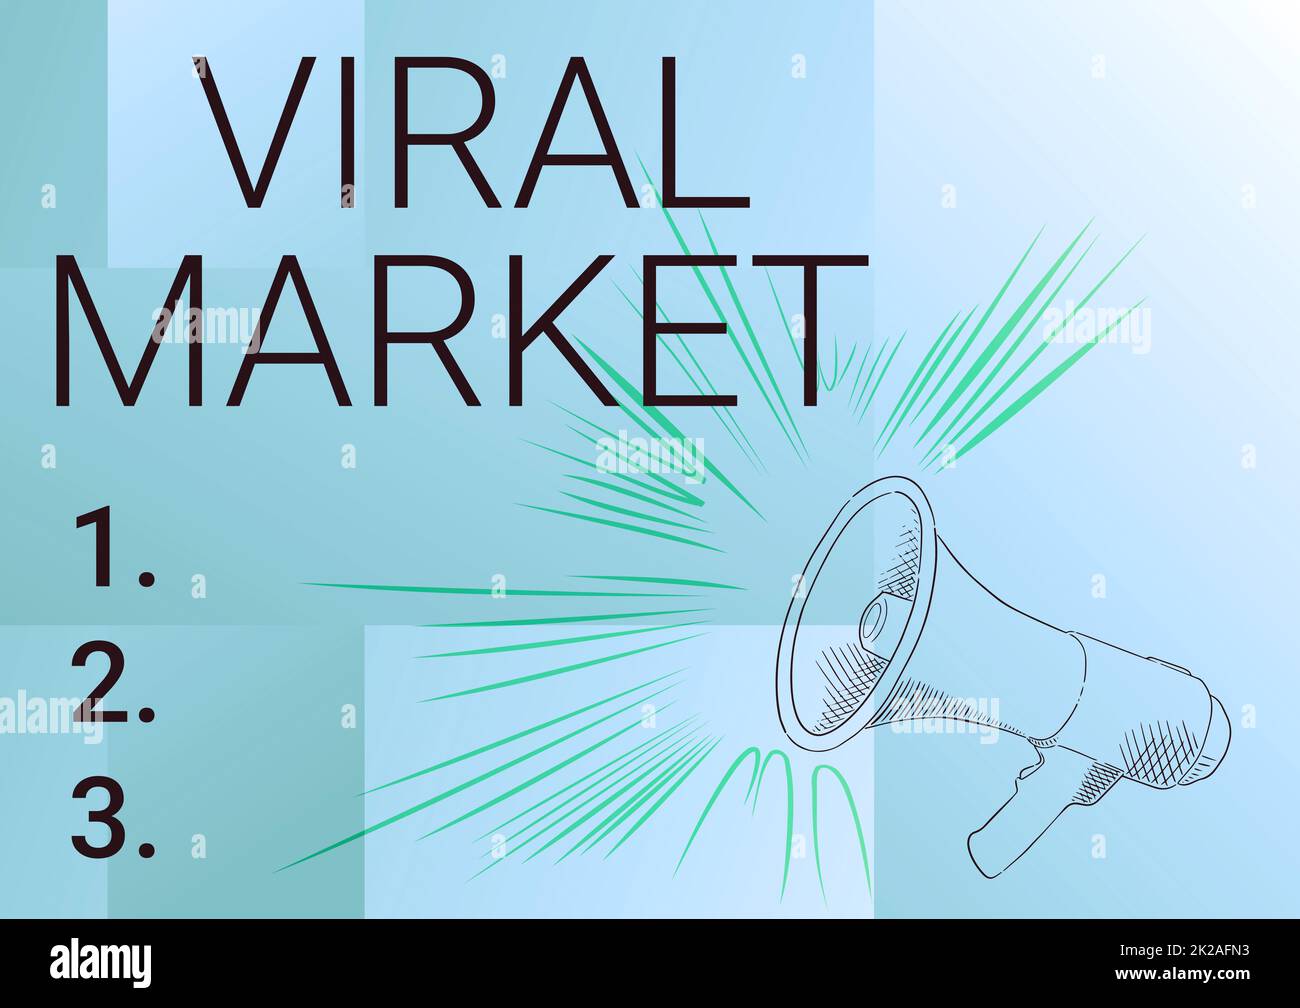 Handwriting text Viral Market. Business approach network passing and spreading message or video on product or service Illustration Of A Loud Megaphones Speaker Making New Announcements. Stock Photo